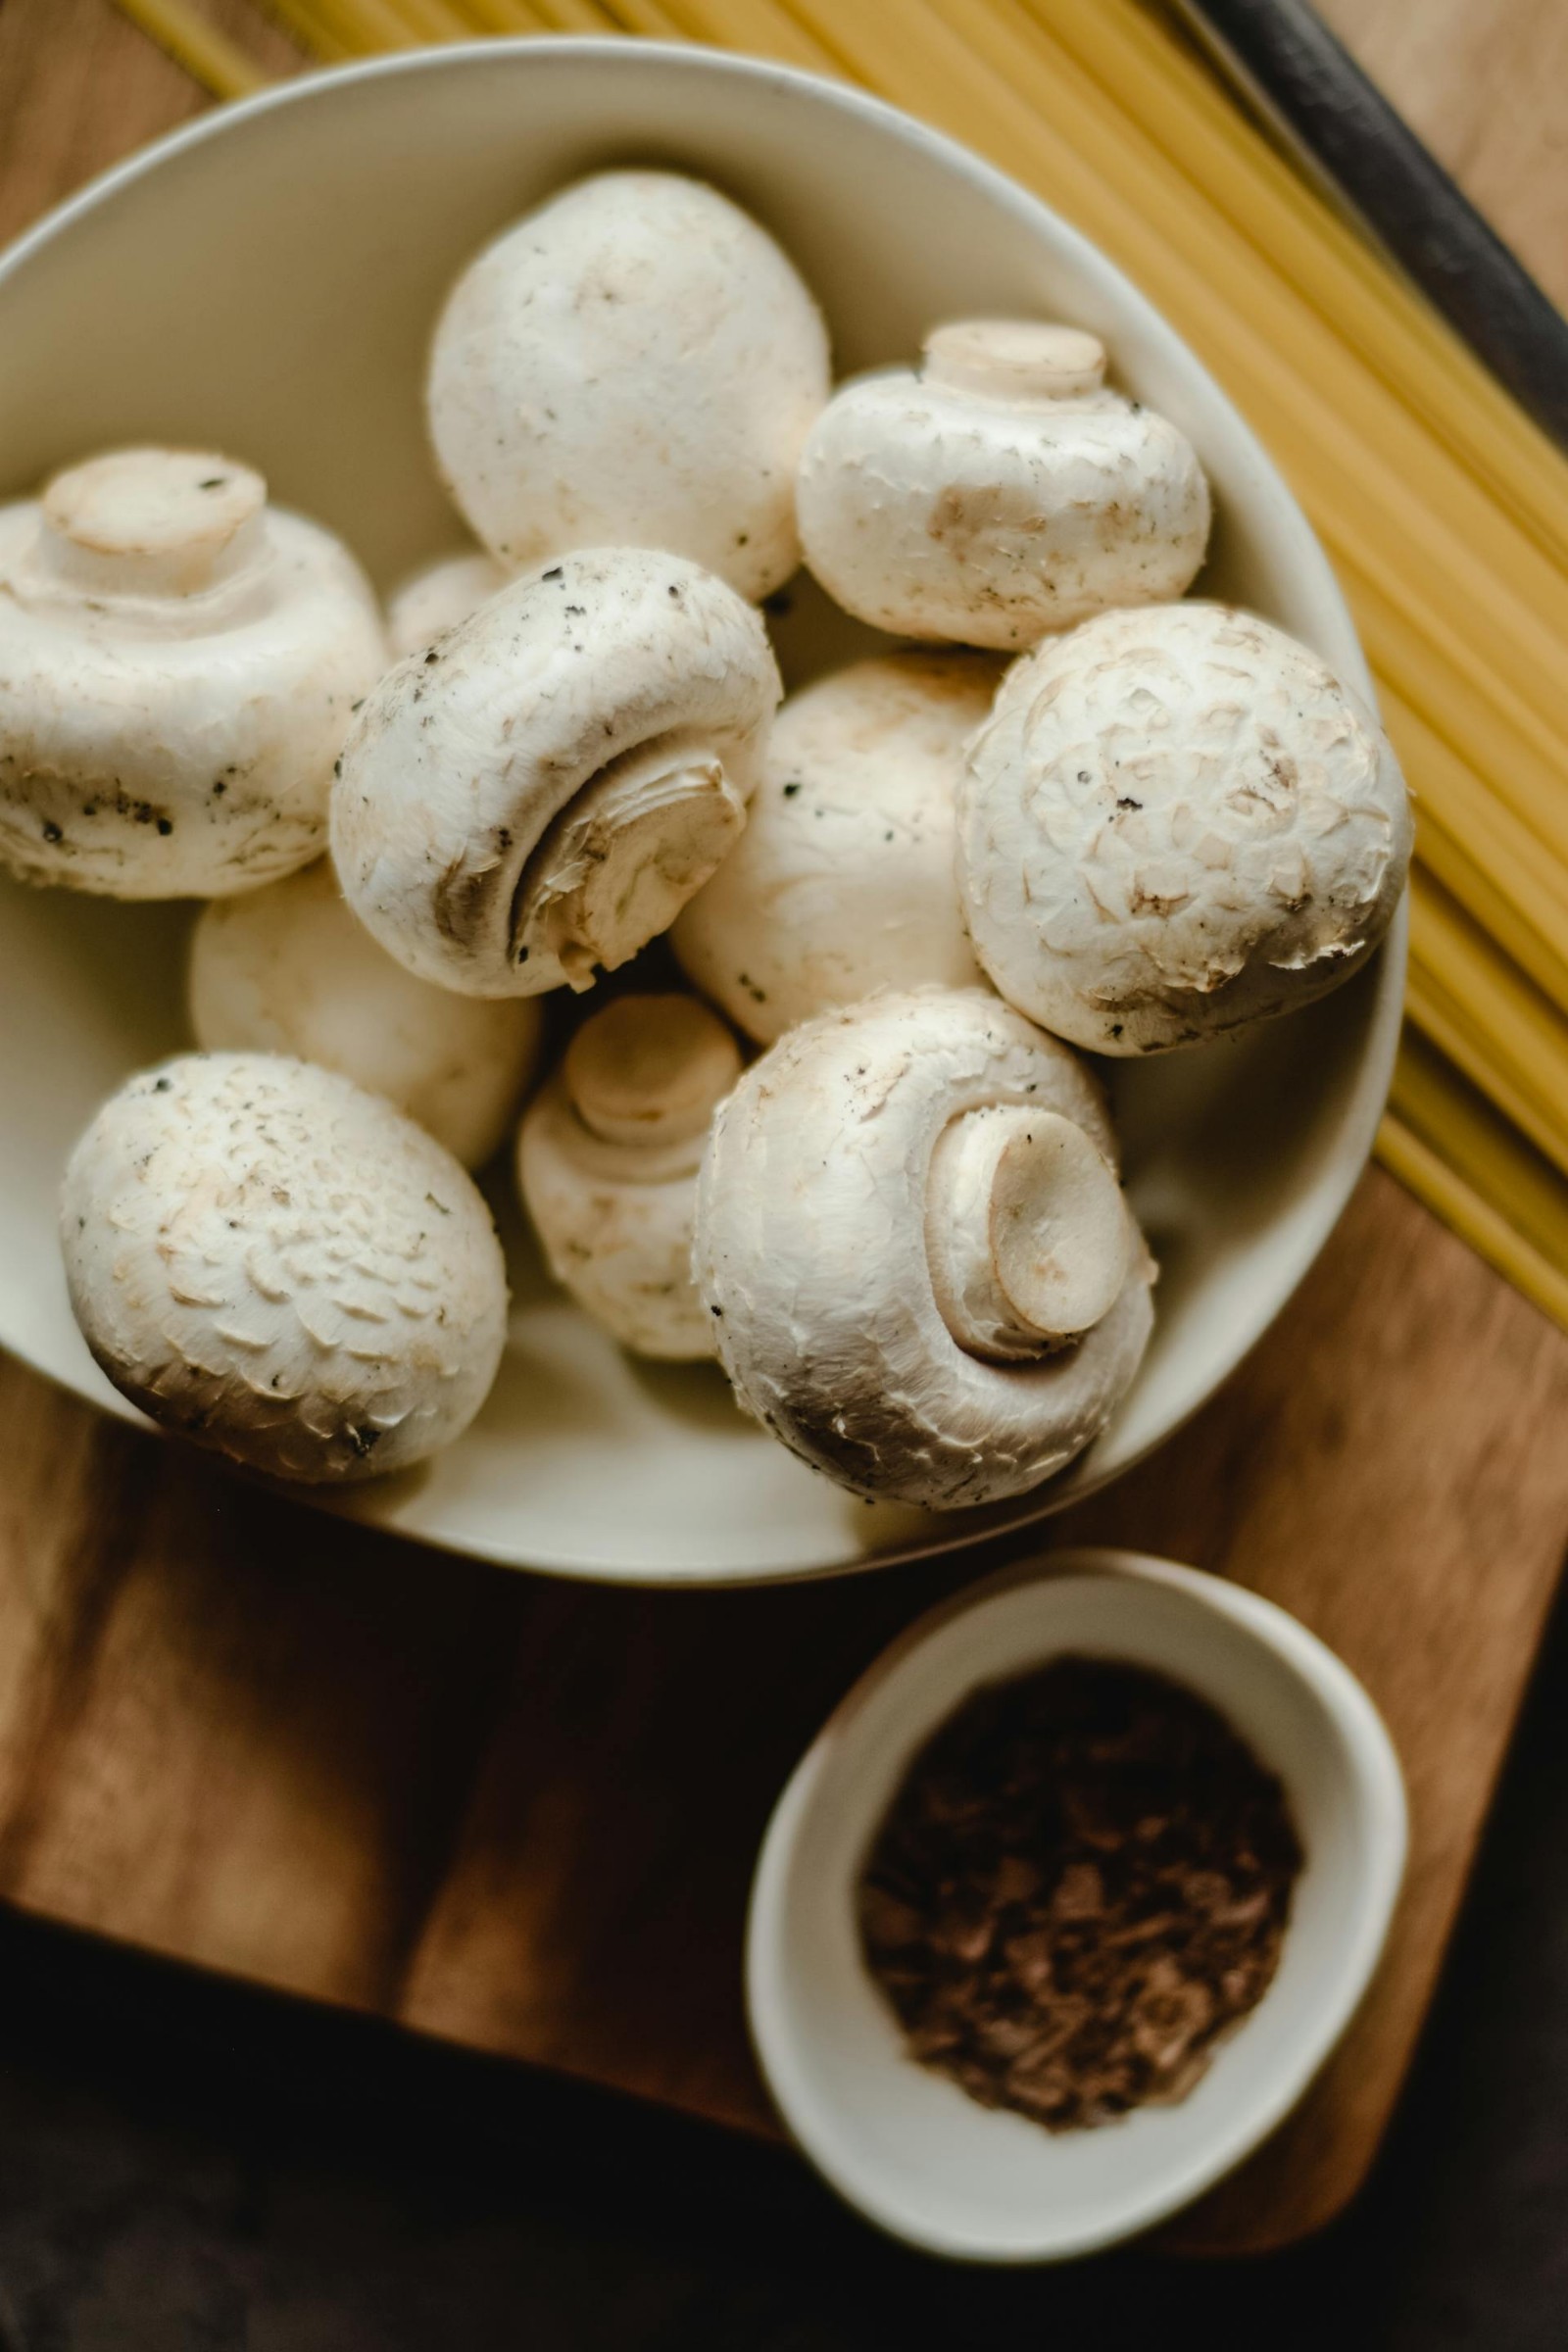 The Best Way To Store Mushrooms So They Actually Last!